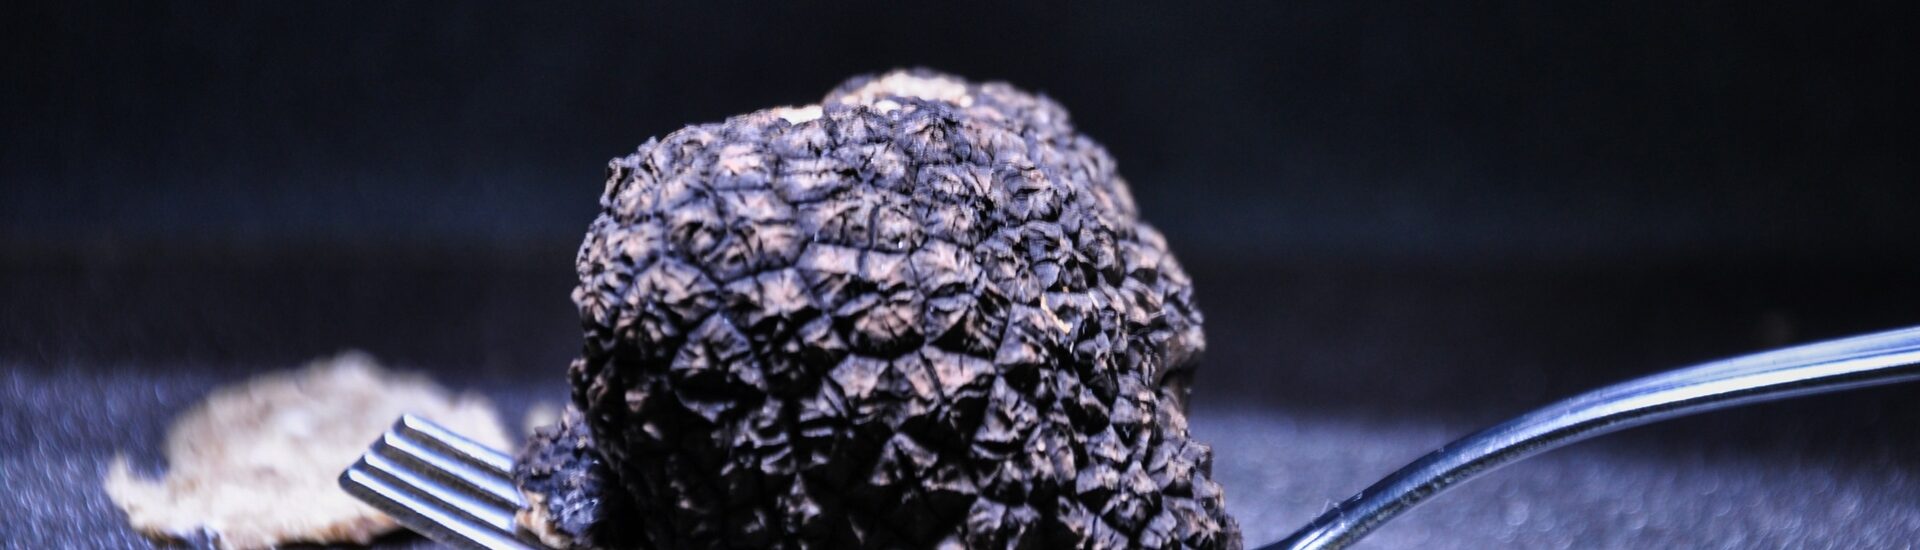 Could Truffles Be California Wine Country’s Next Luxury Product?